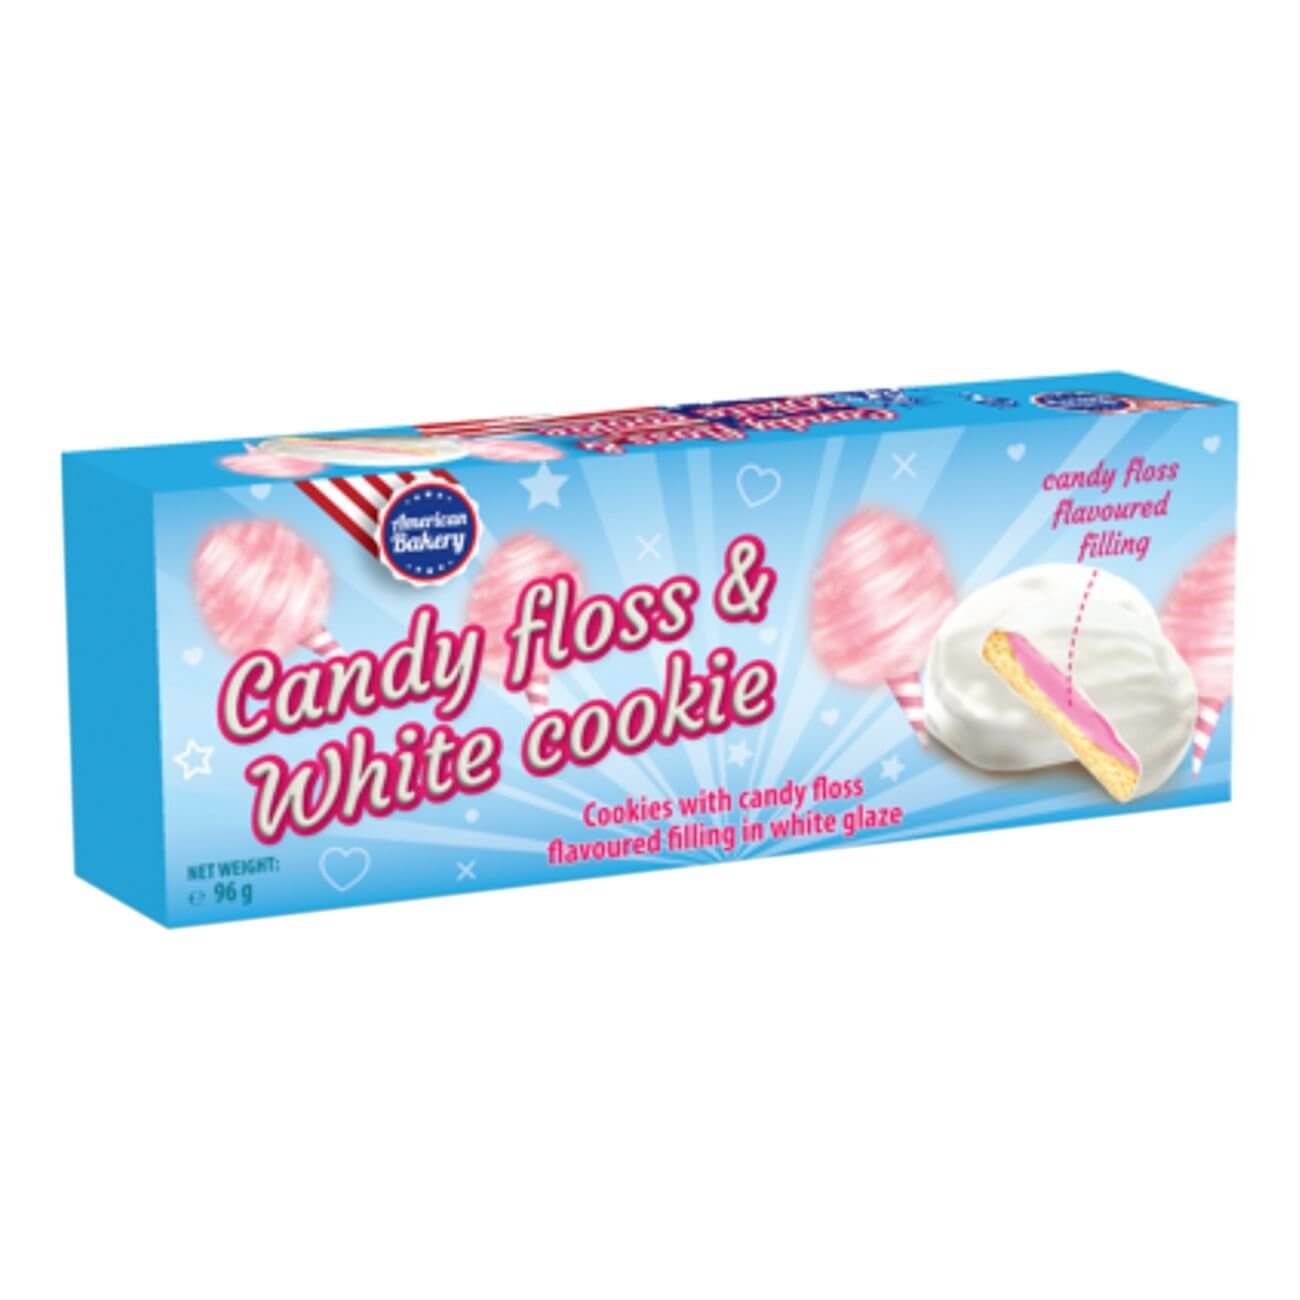 American Bakery Candyfloss & White Cookie 96g